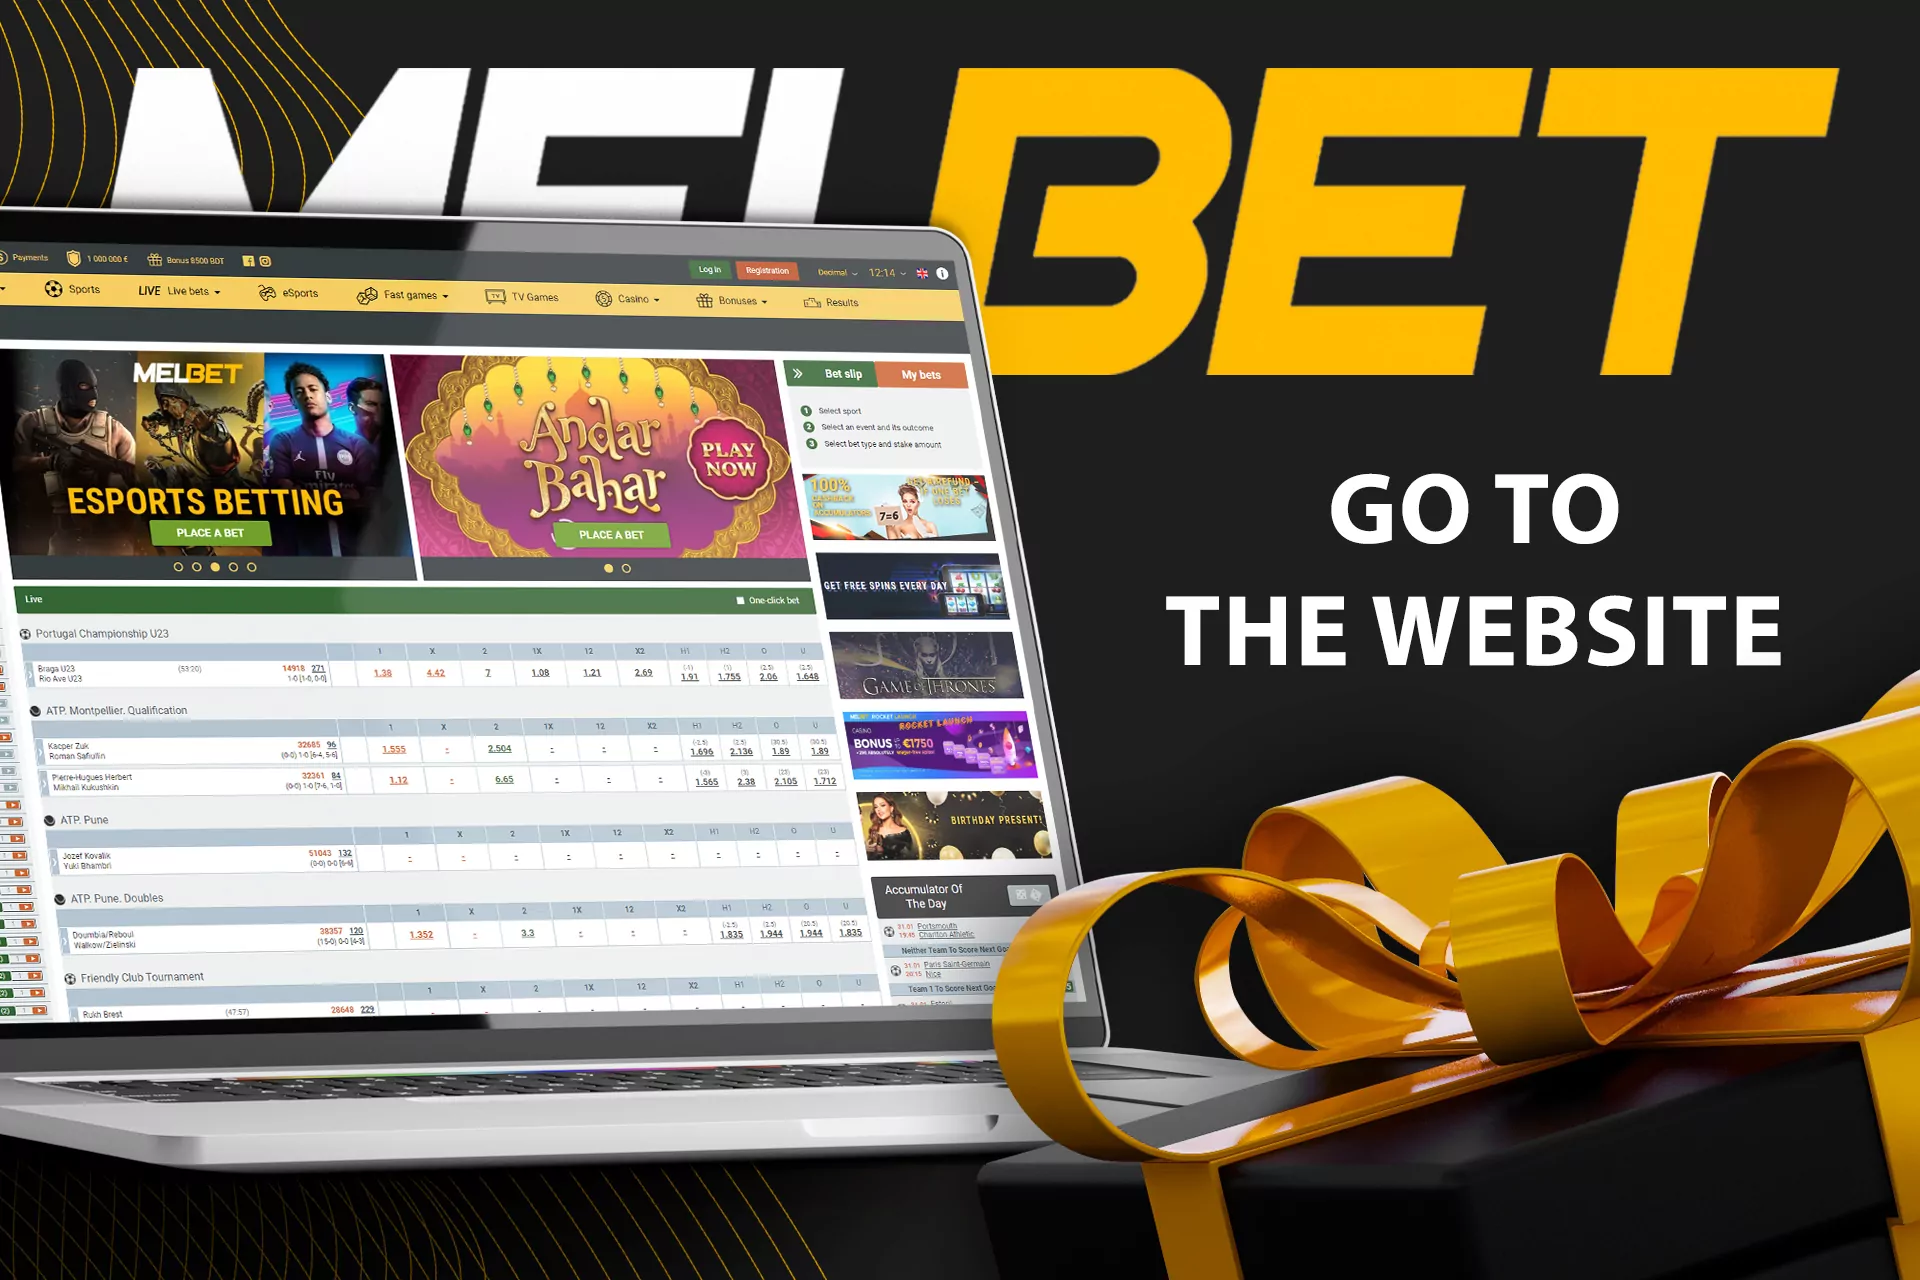 Open a browser and go to the site of Melbet.